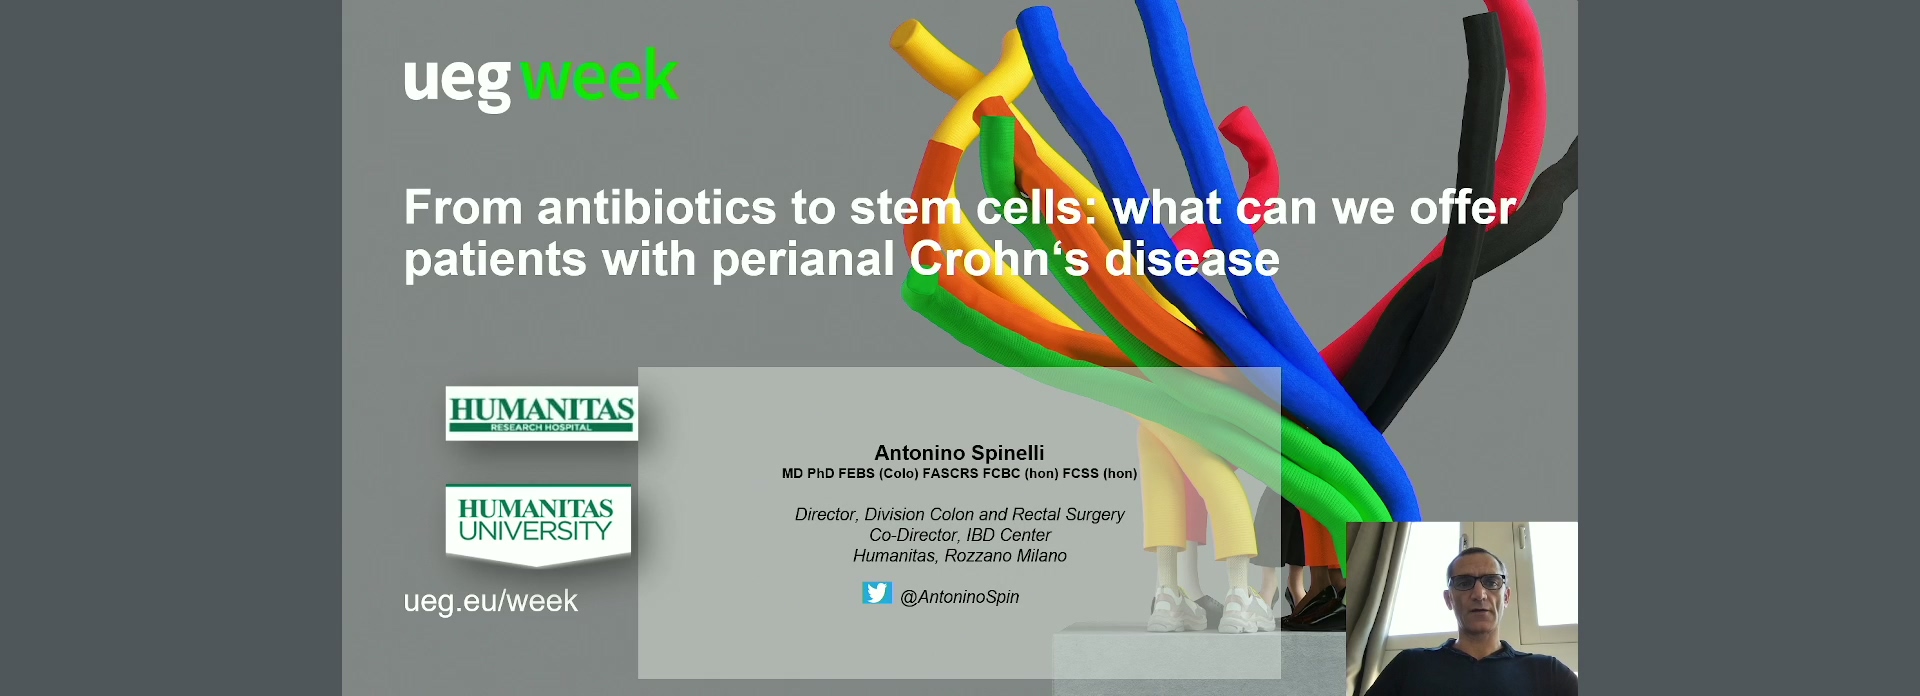 From antibiotics to stem cells: What can we offer patients with perianal Crohn's disease